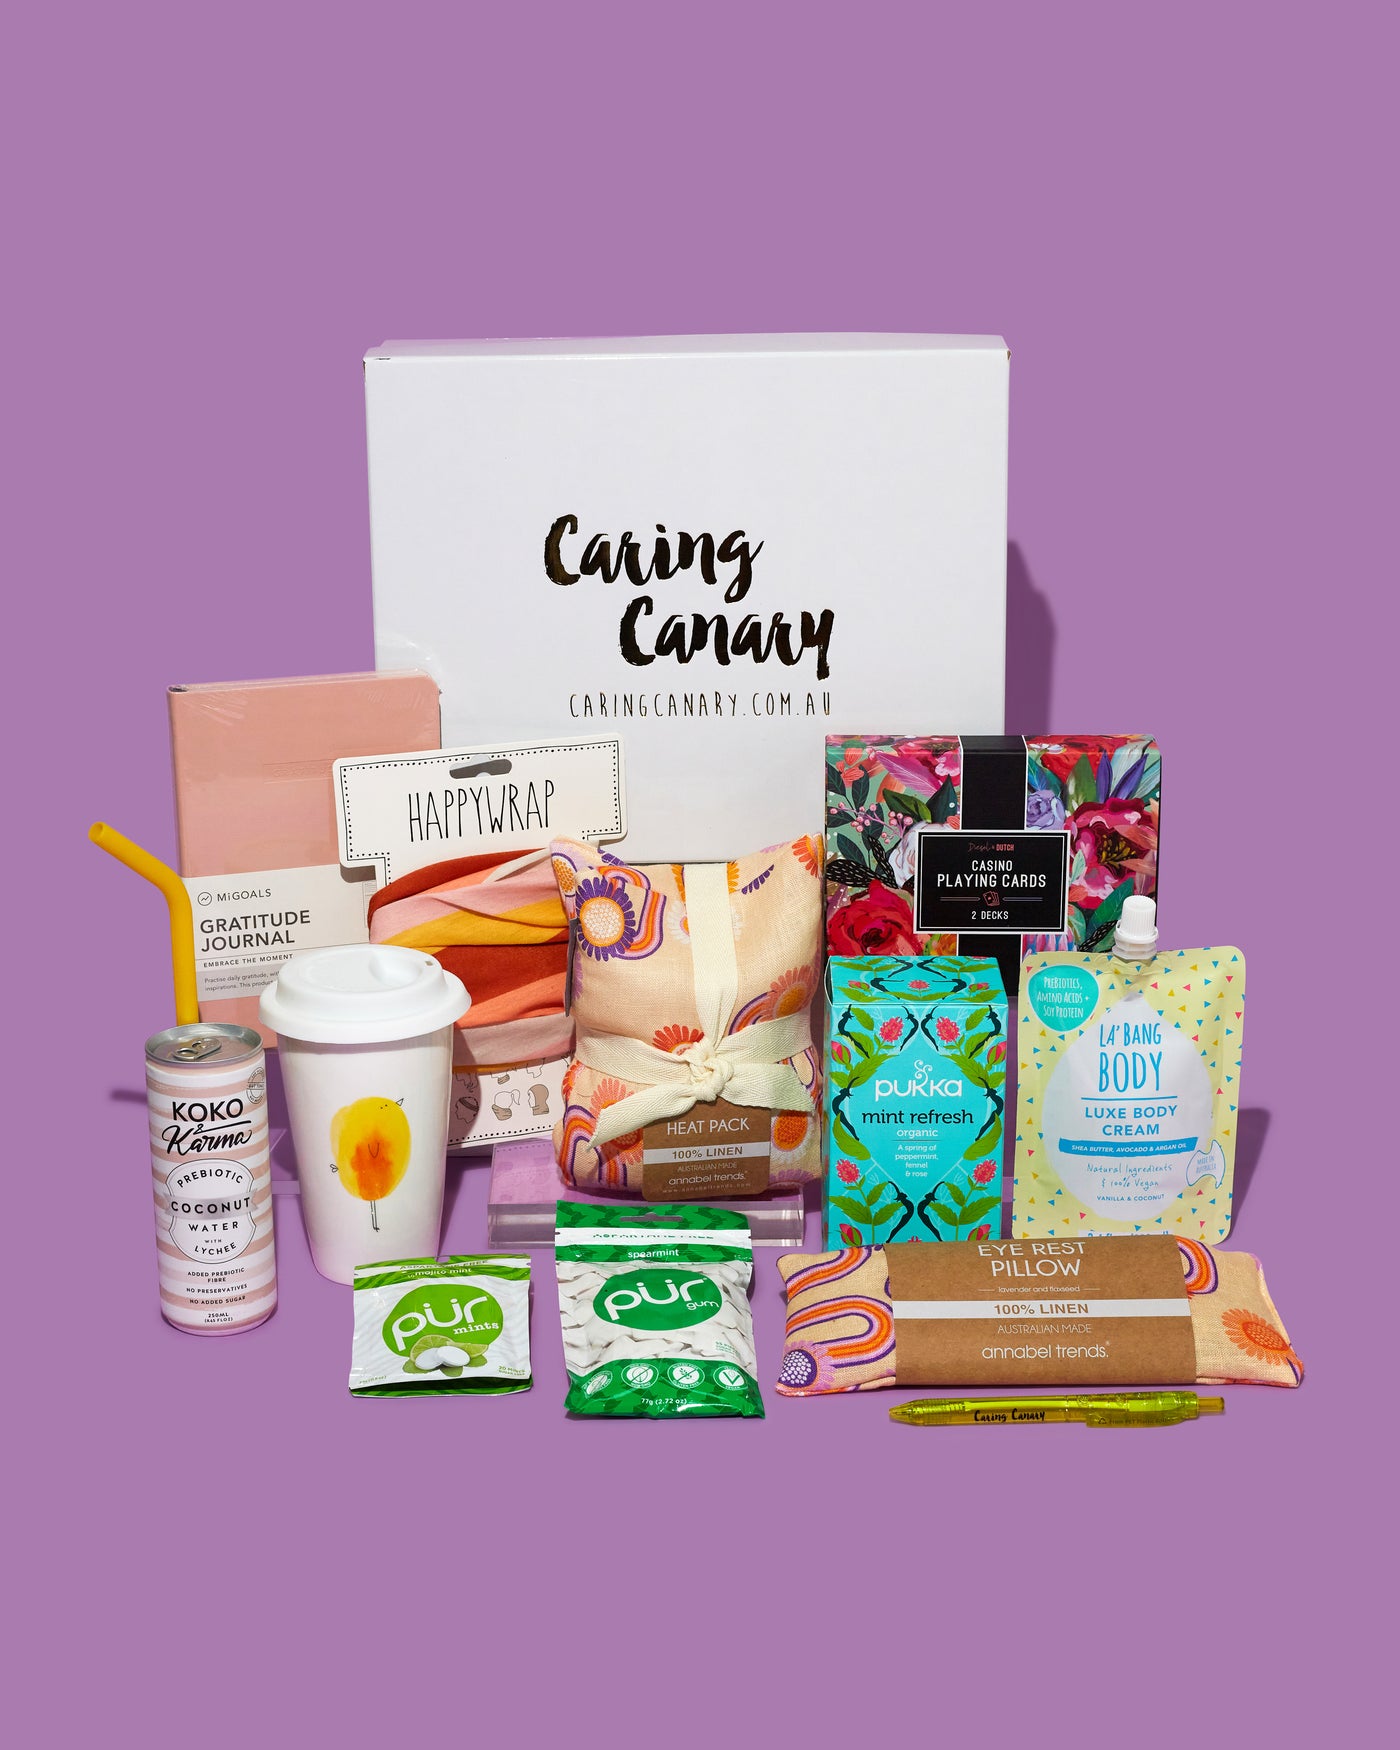 Her Wellness Care Package - Caring Canary